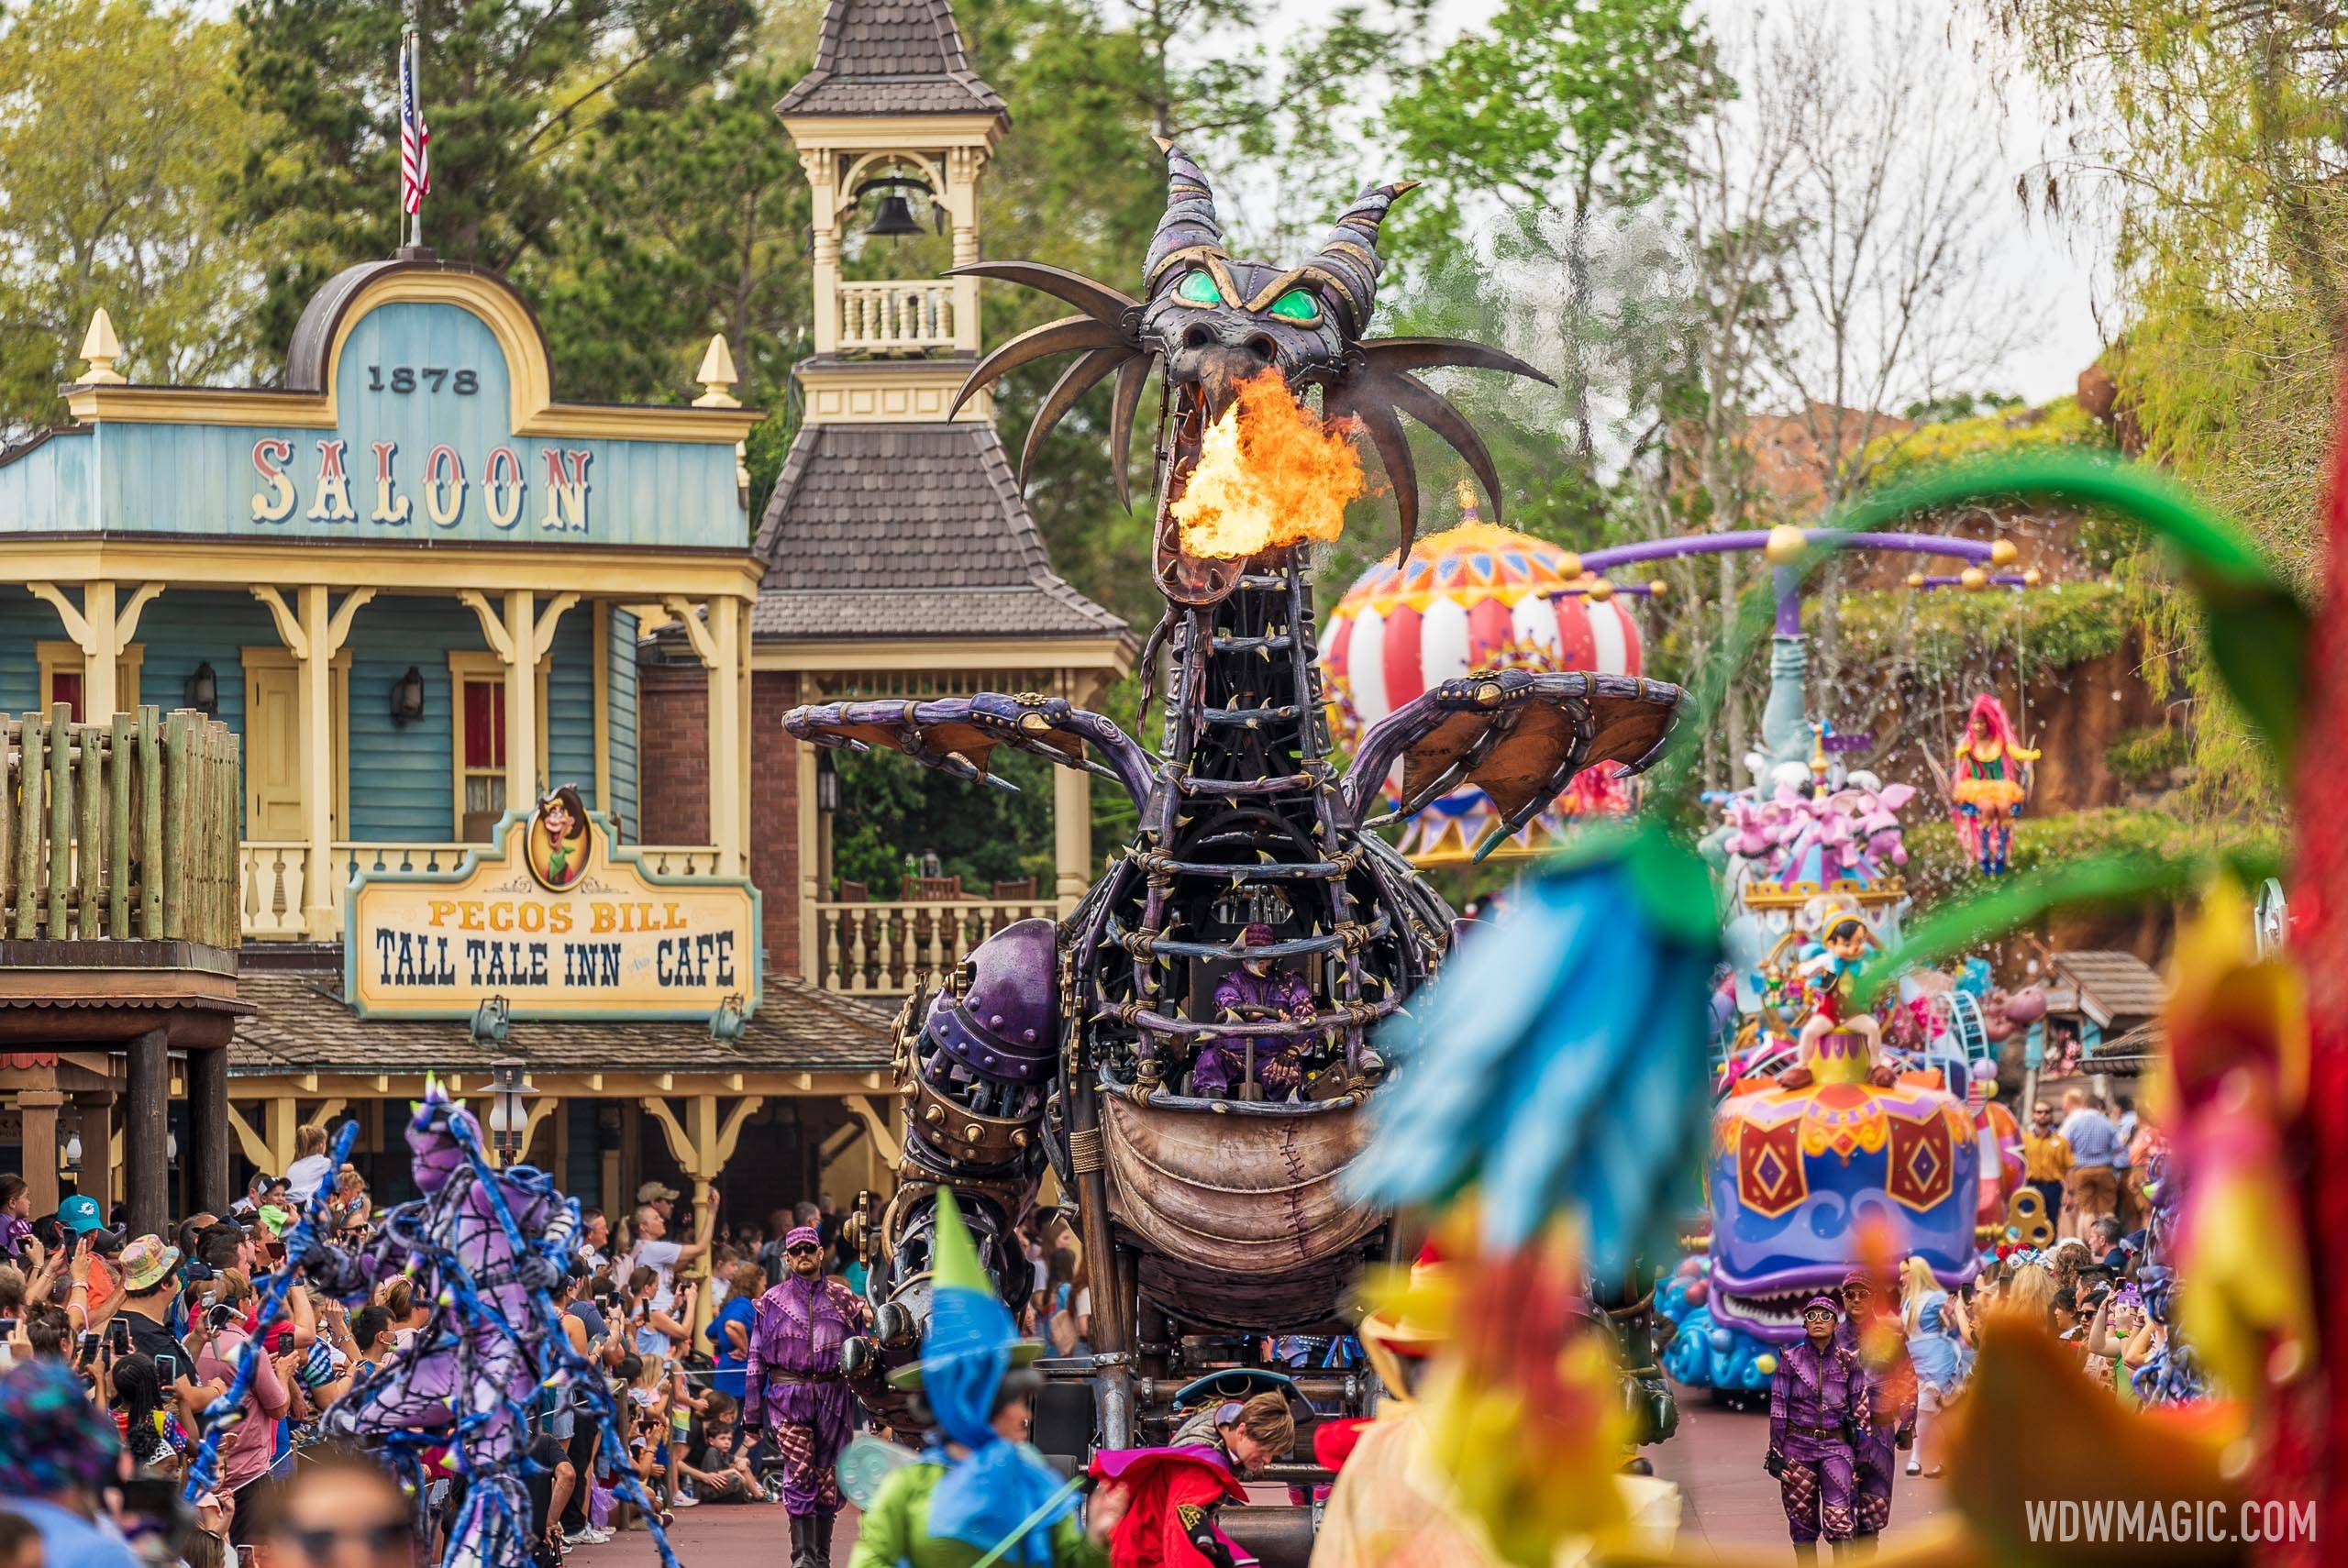 Two performances of Festival of Fantasy Parade on December 15